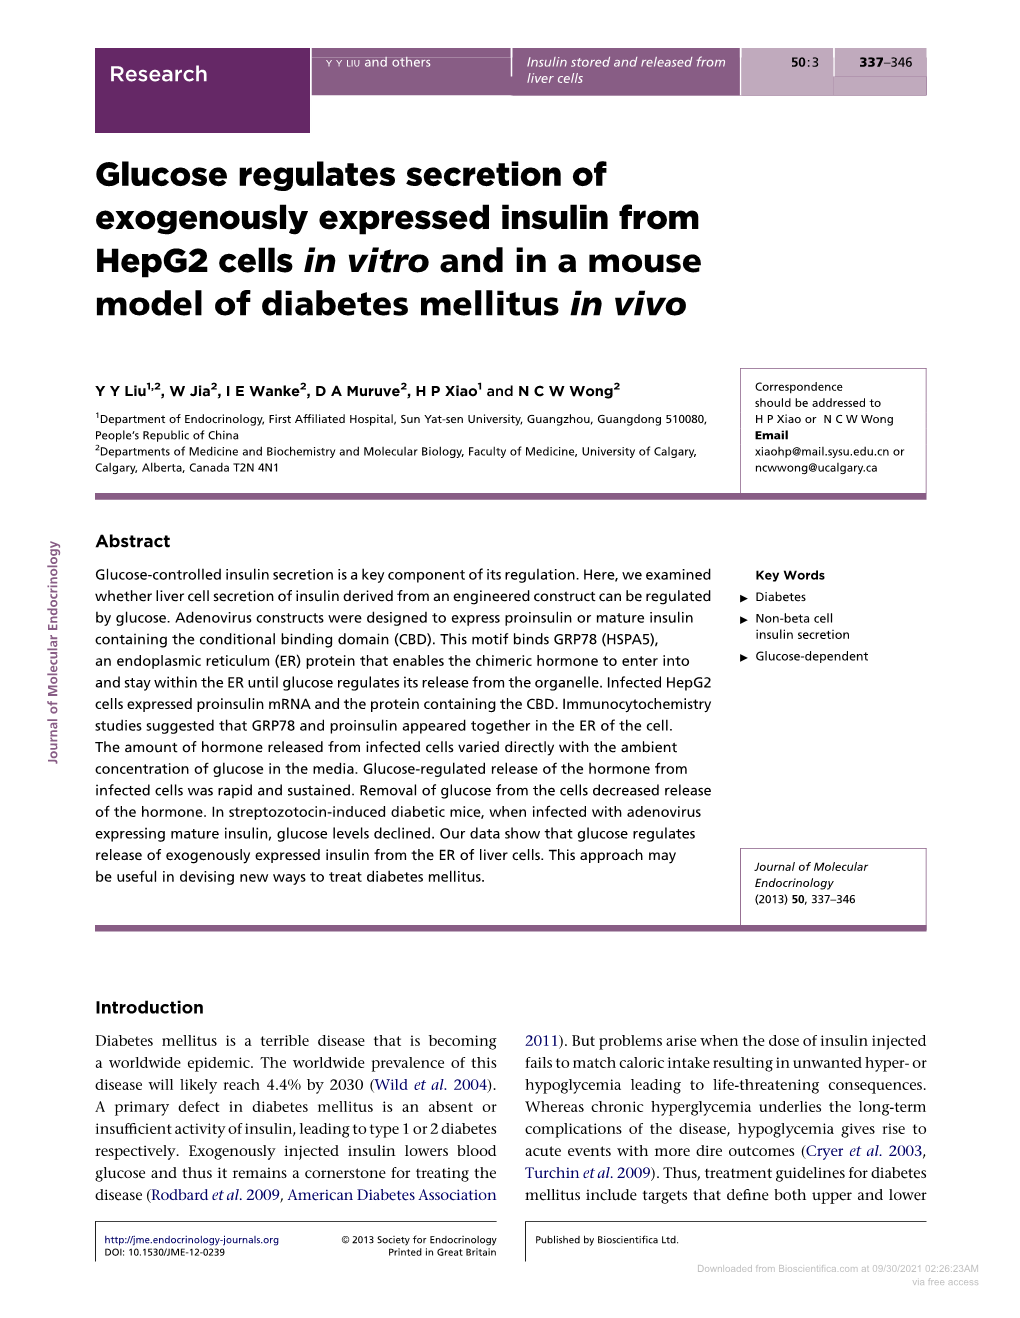 Glucose Regulates Secretion of Exogenously Expressed Insulin from Hepg2 Cells in Vitro and in a Mouse Model of Diabetes Mellitus in Vivo